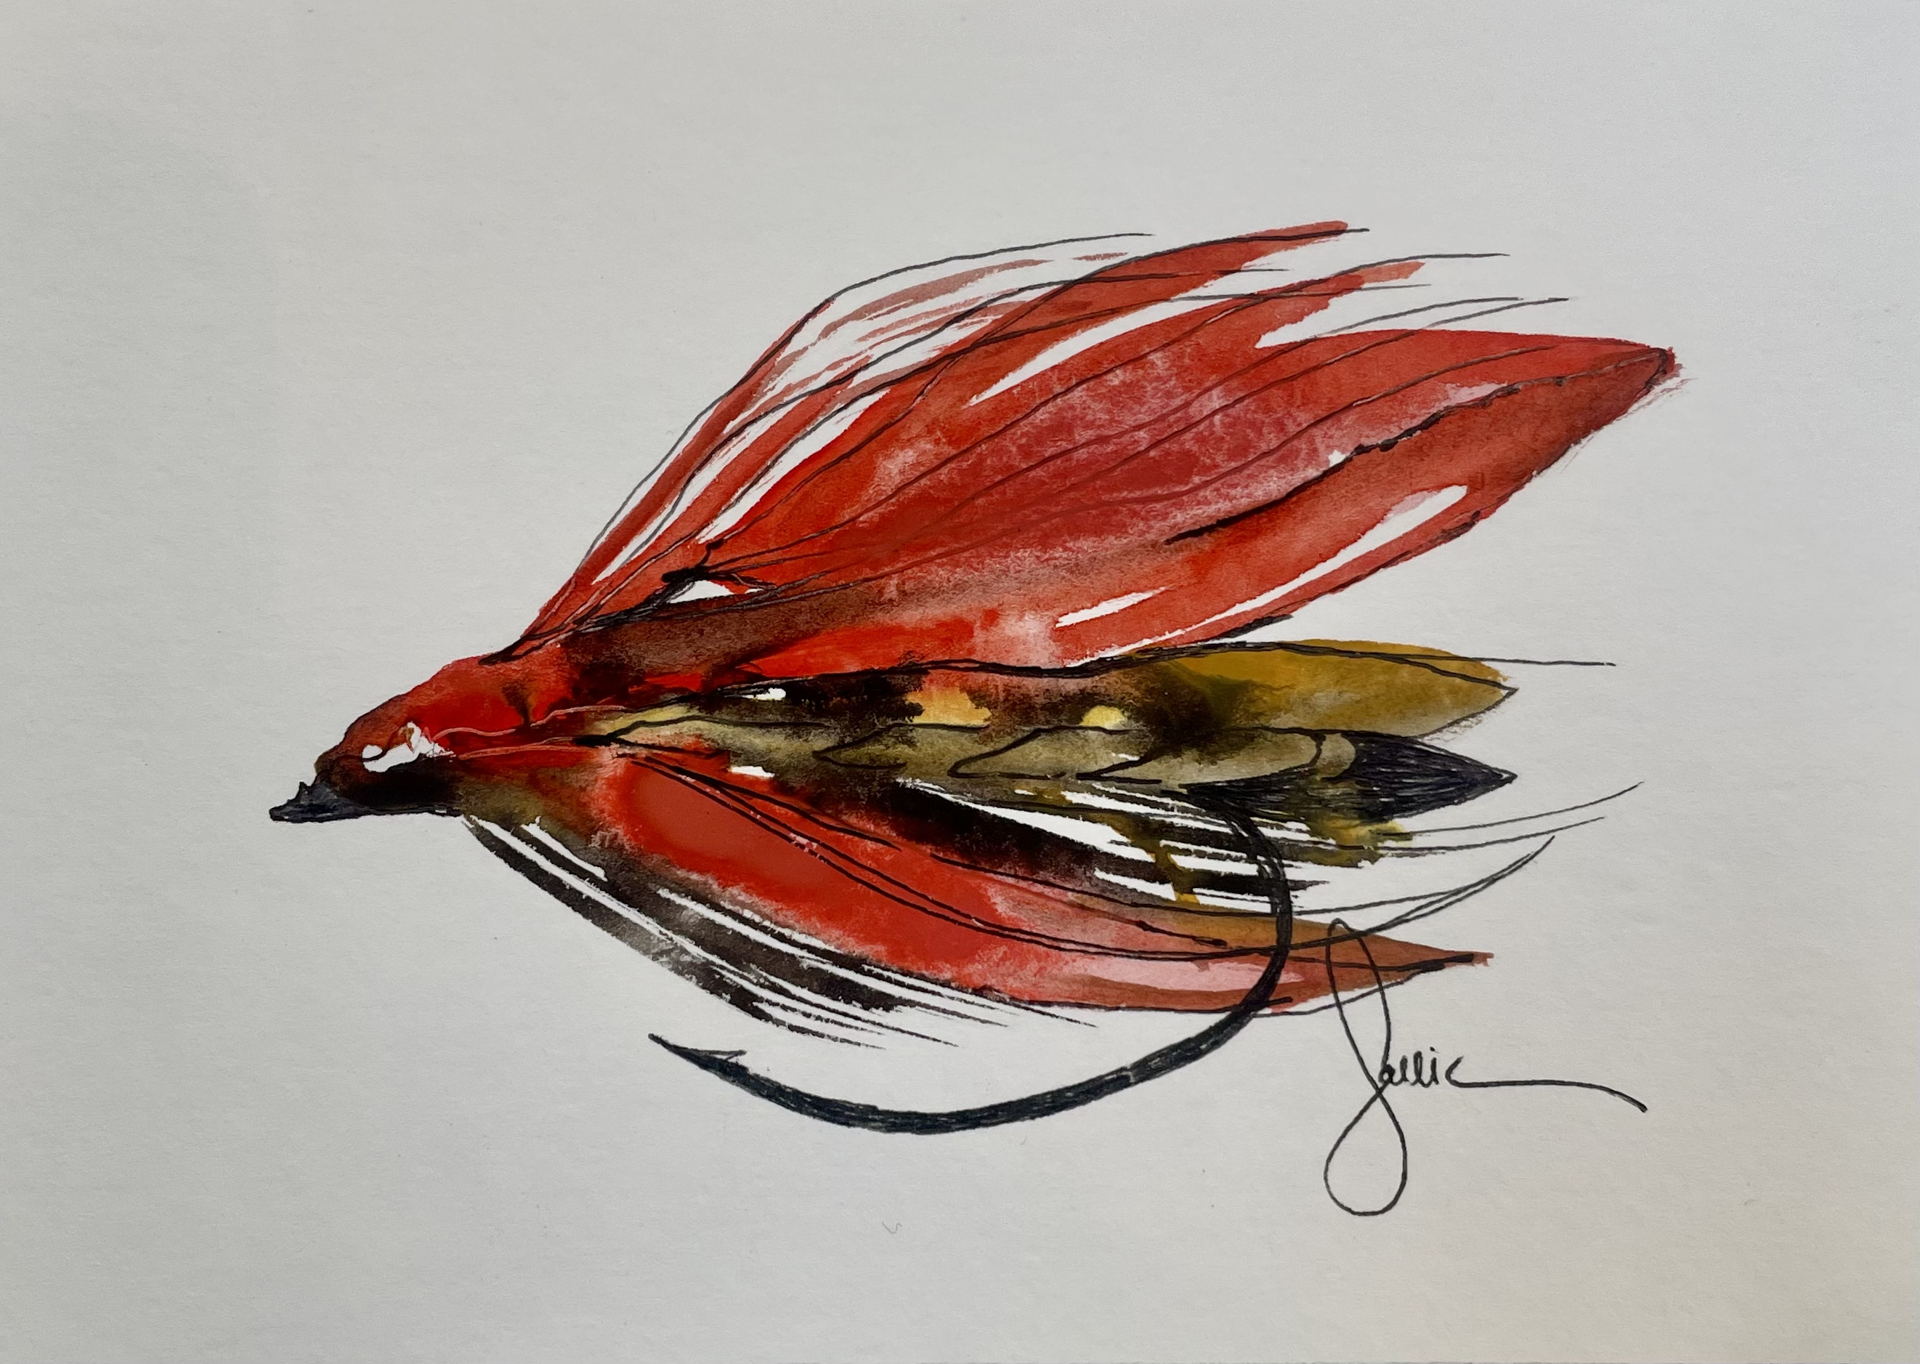 Red/Yellow Fly by Sallie Strickland